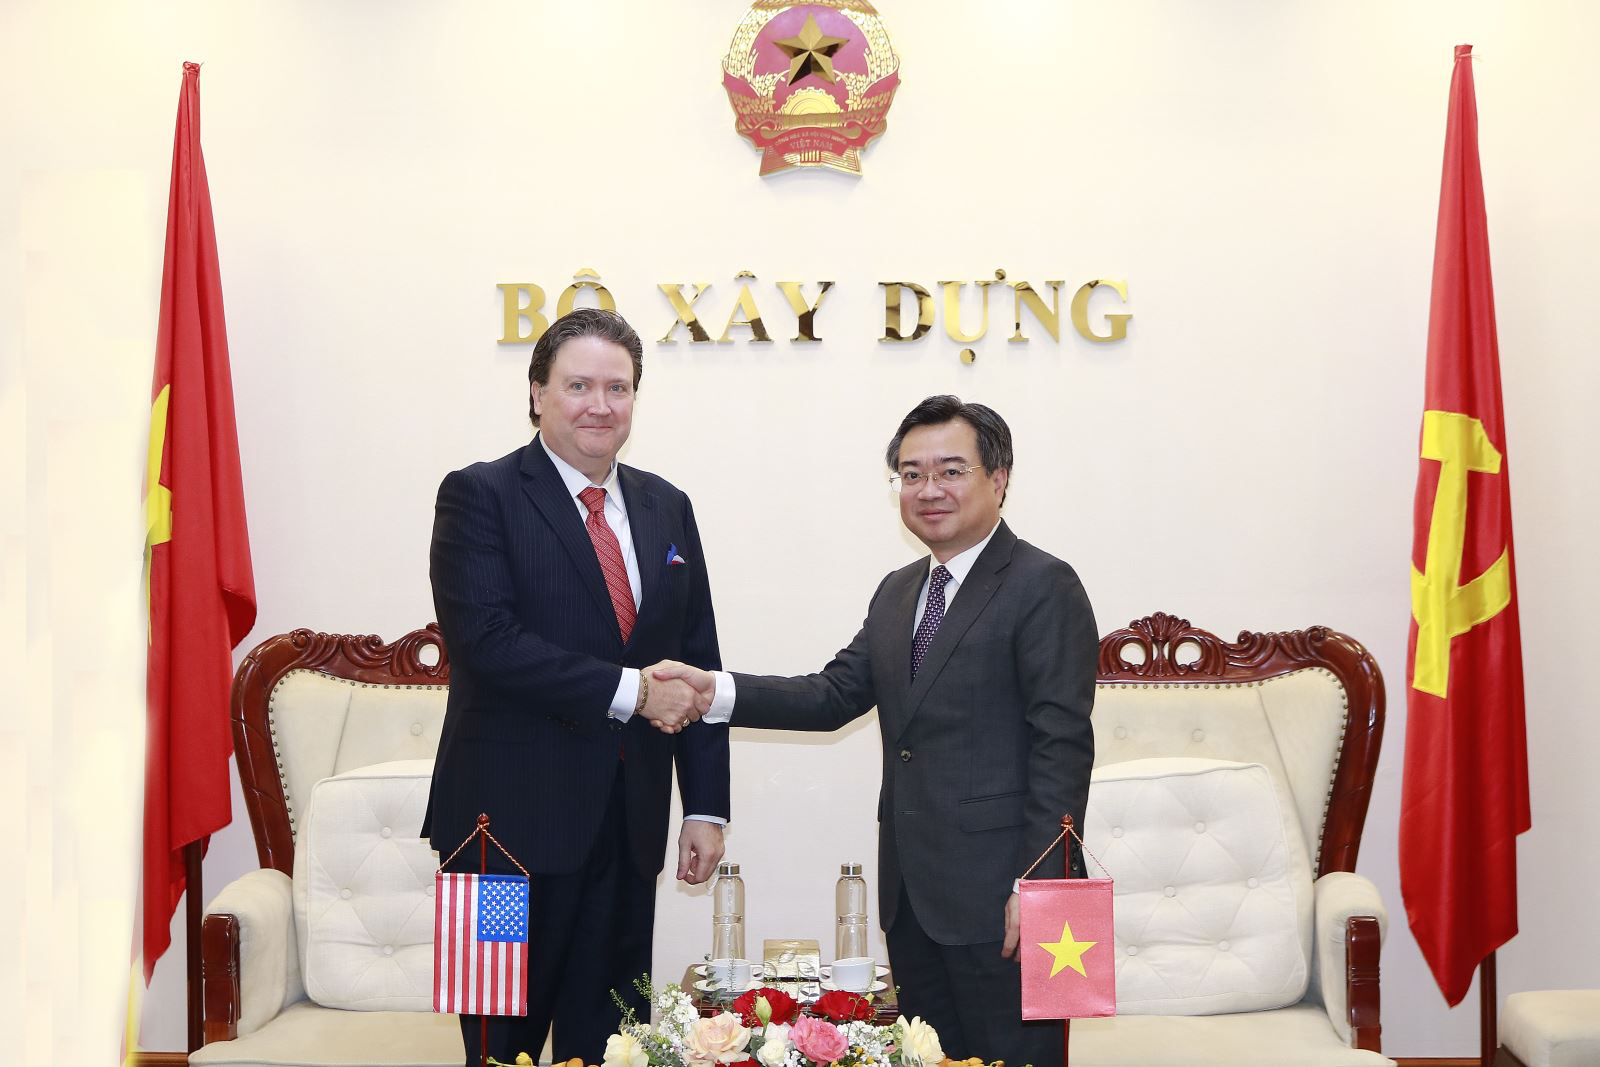 Vietnam aspires to learn about smart city growth from US